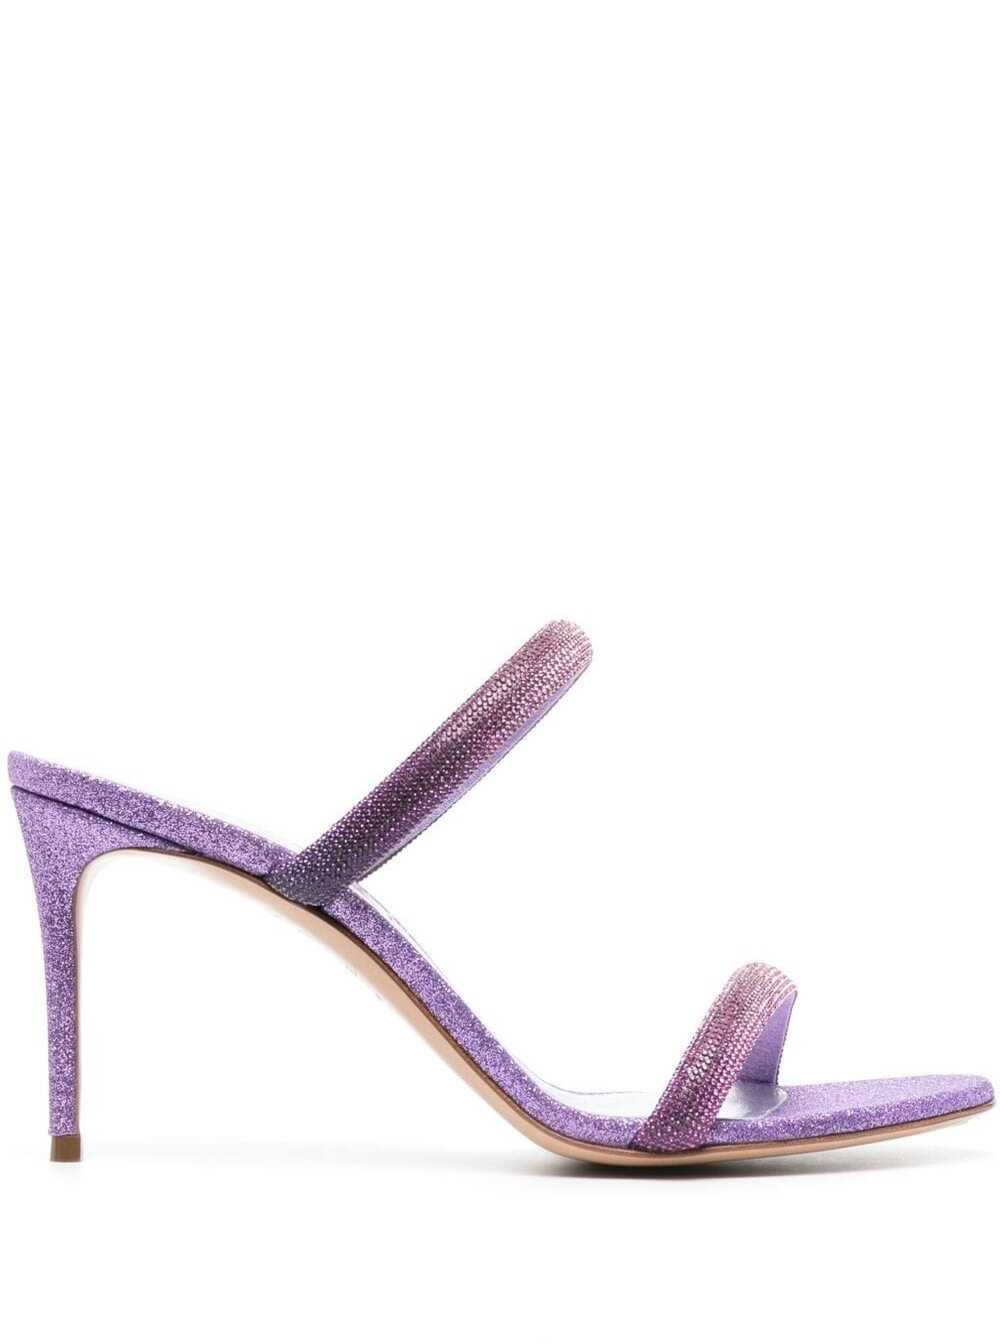 CASADEI VIOLET GLITTERED JULIA HOLLIWOOD MULES IN CALF LEATHER WOMAN